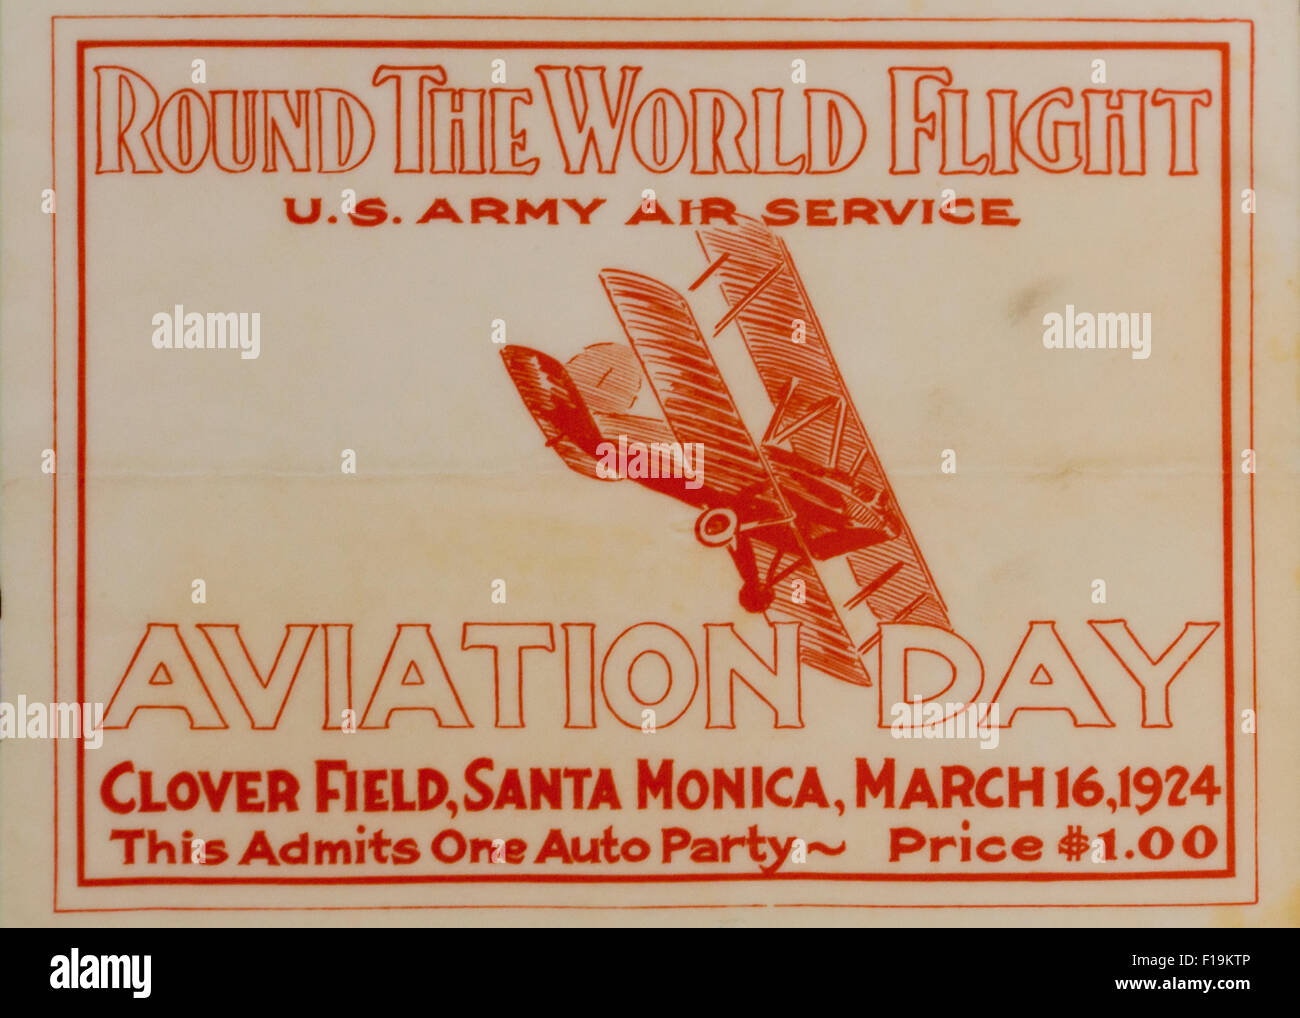 US Army Air Service Round the World Flight Aviation Day admission ticket - USA Stock Photo